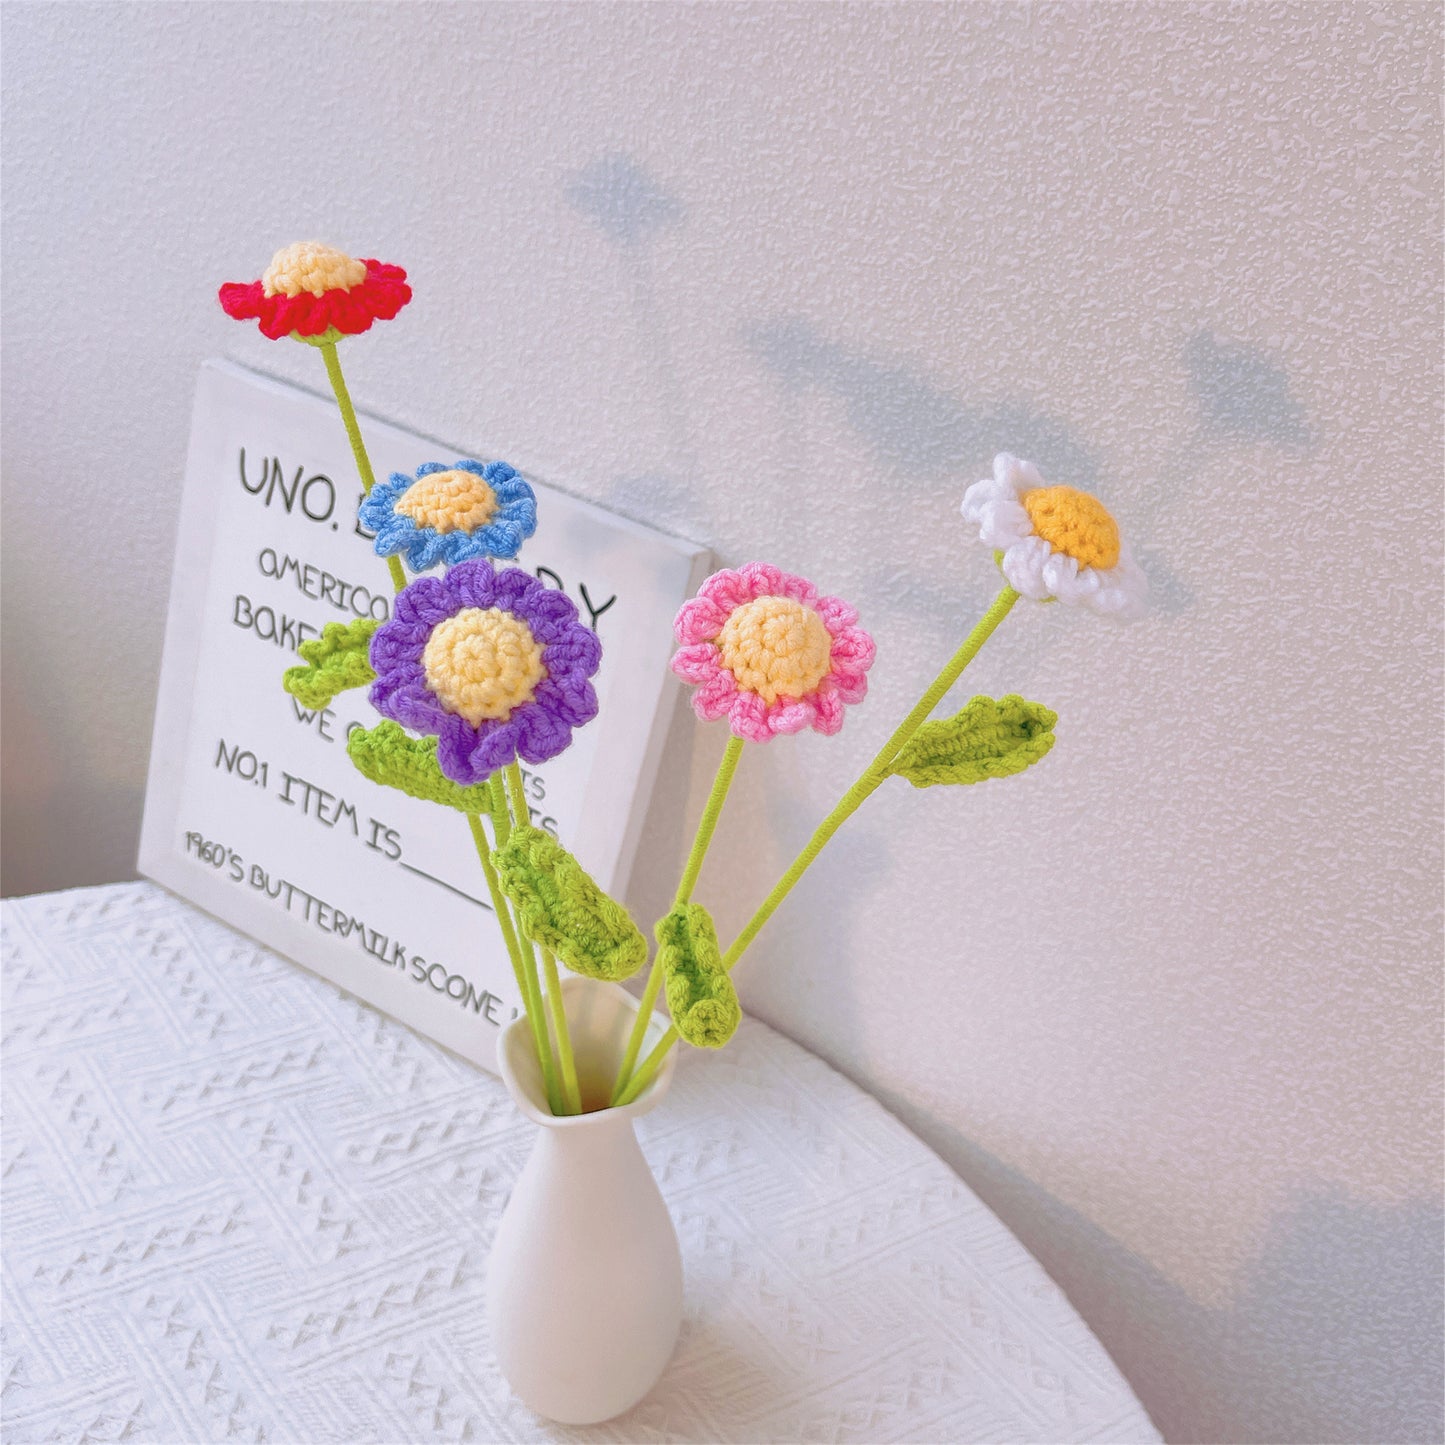 Sunny Meadow: Handcrafted Crochet Small Daisies Stake for a Cheerful Garden Decor